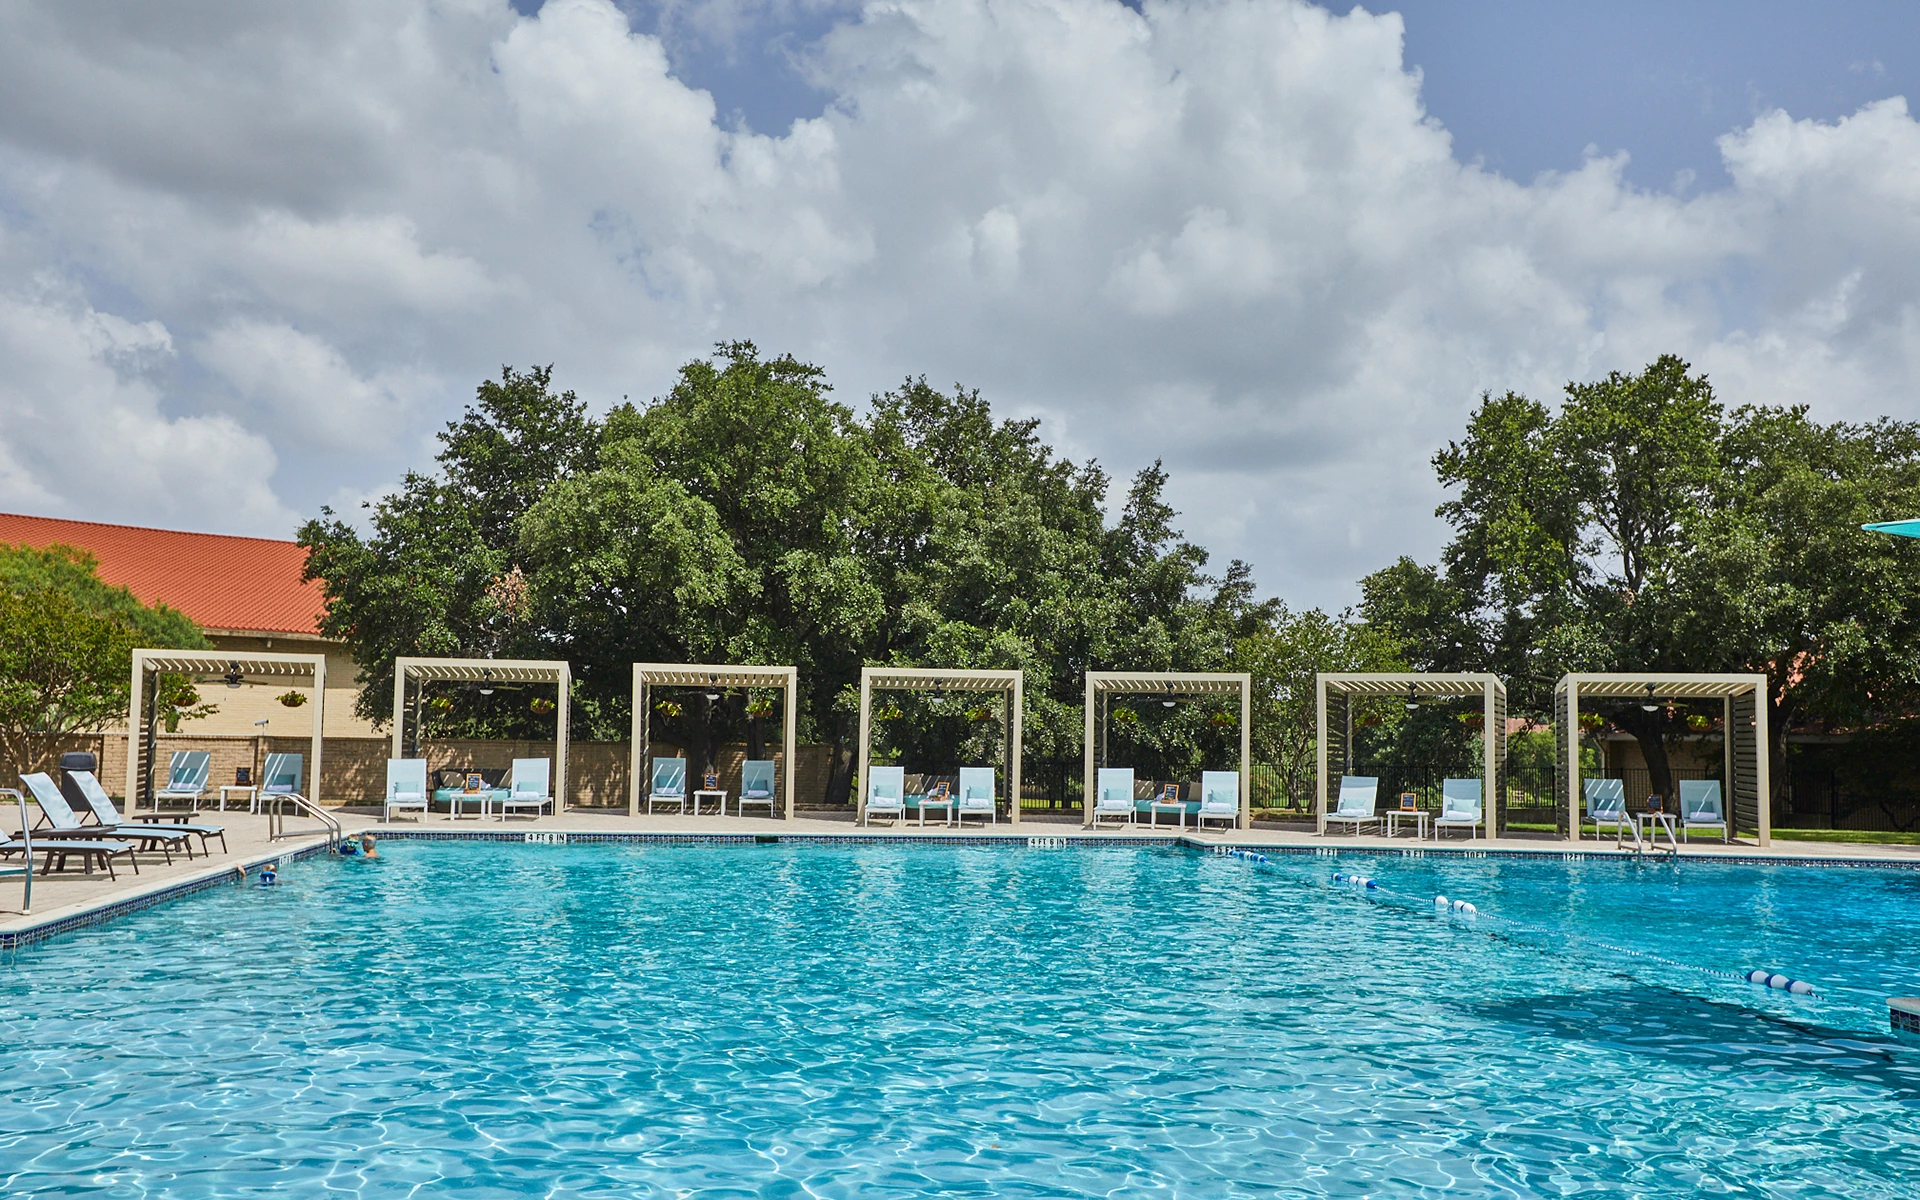 Official Pool of Elizabeth Swims – The Texas Pool